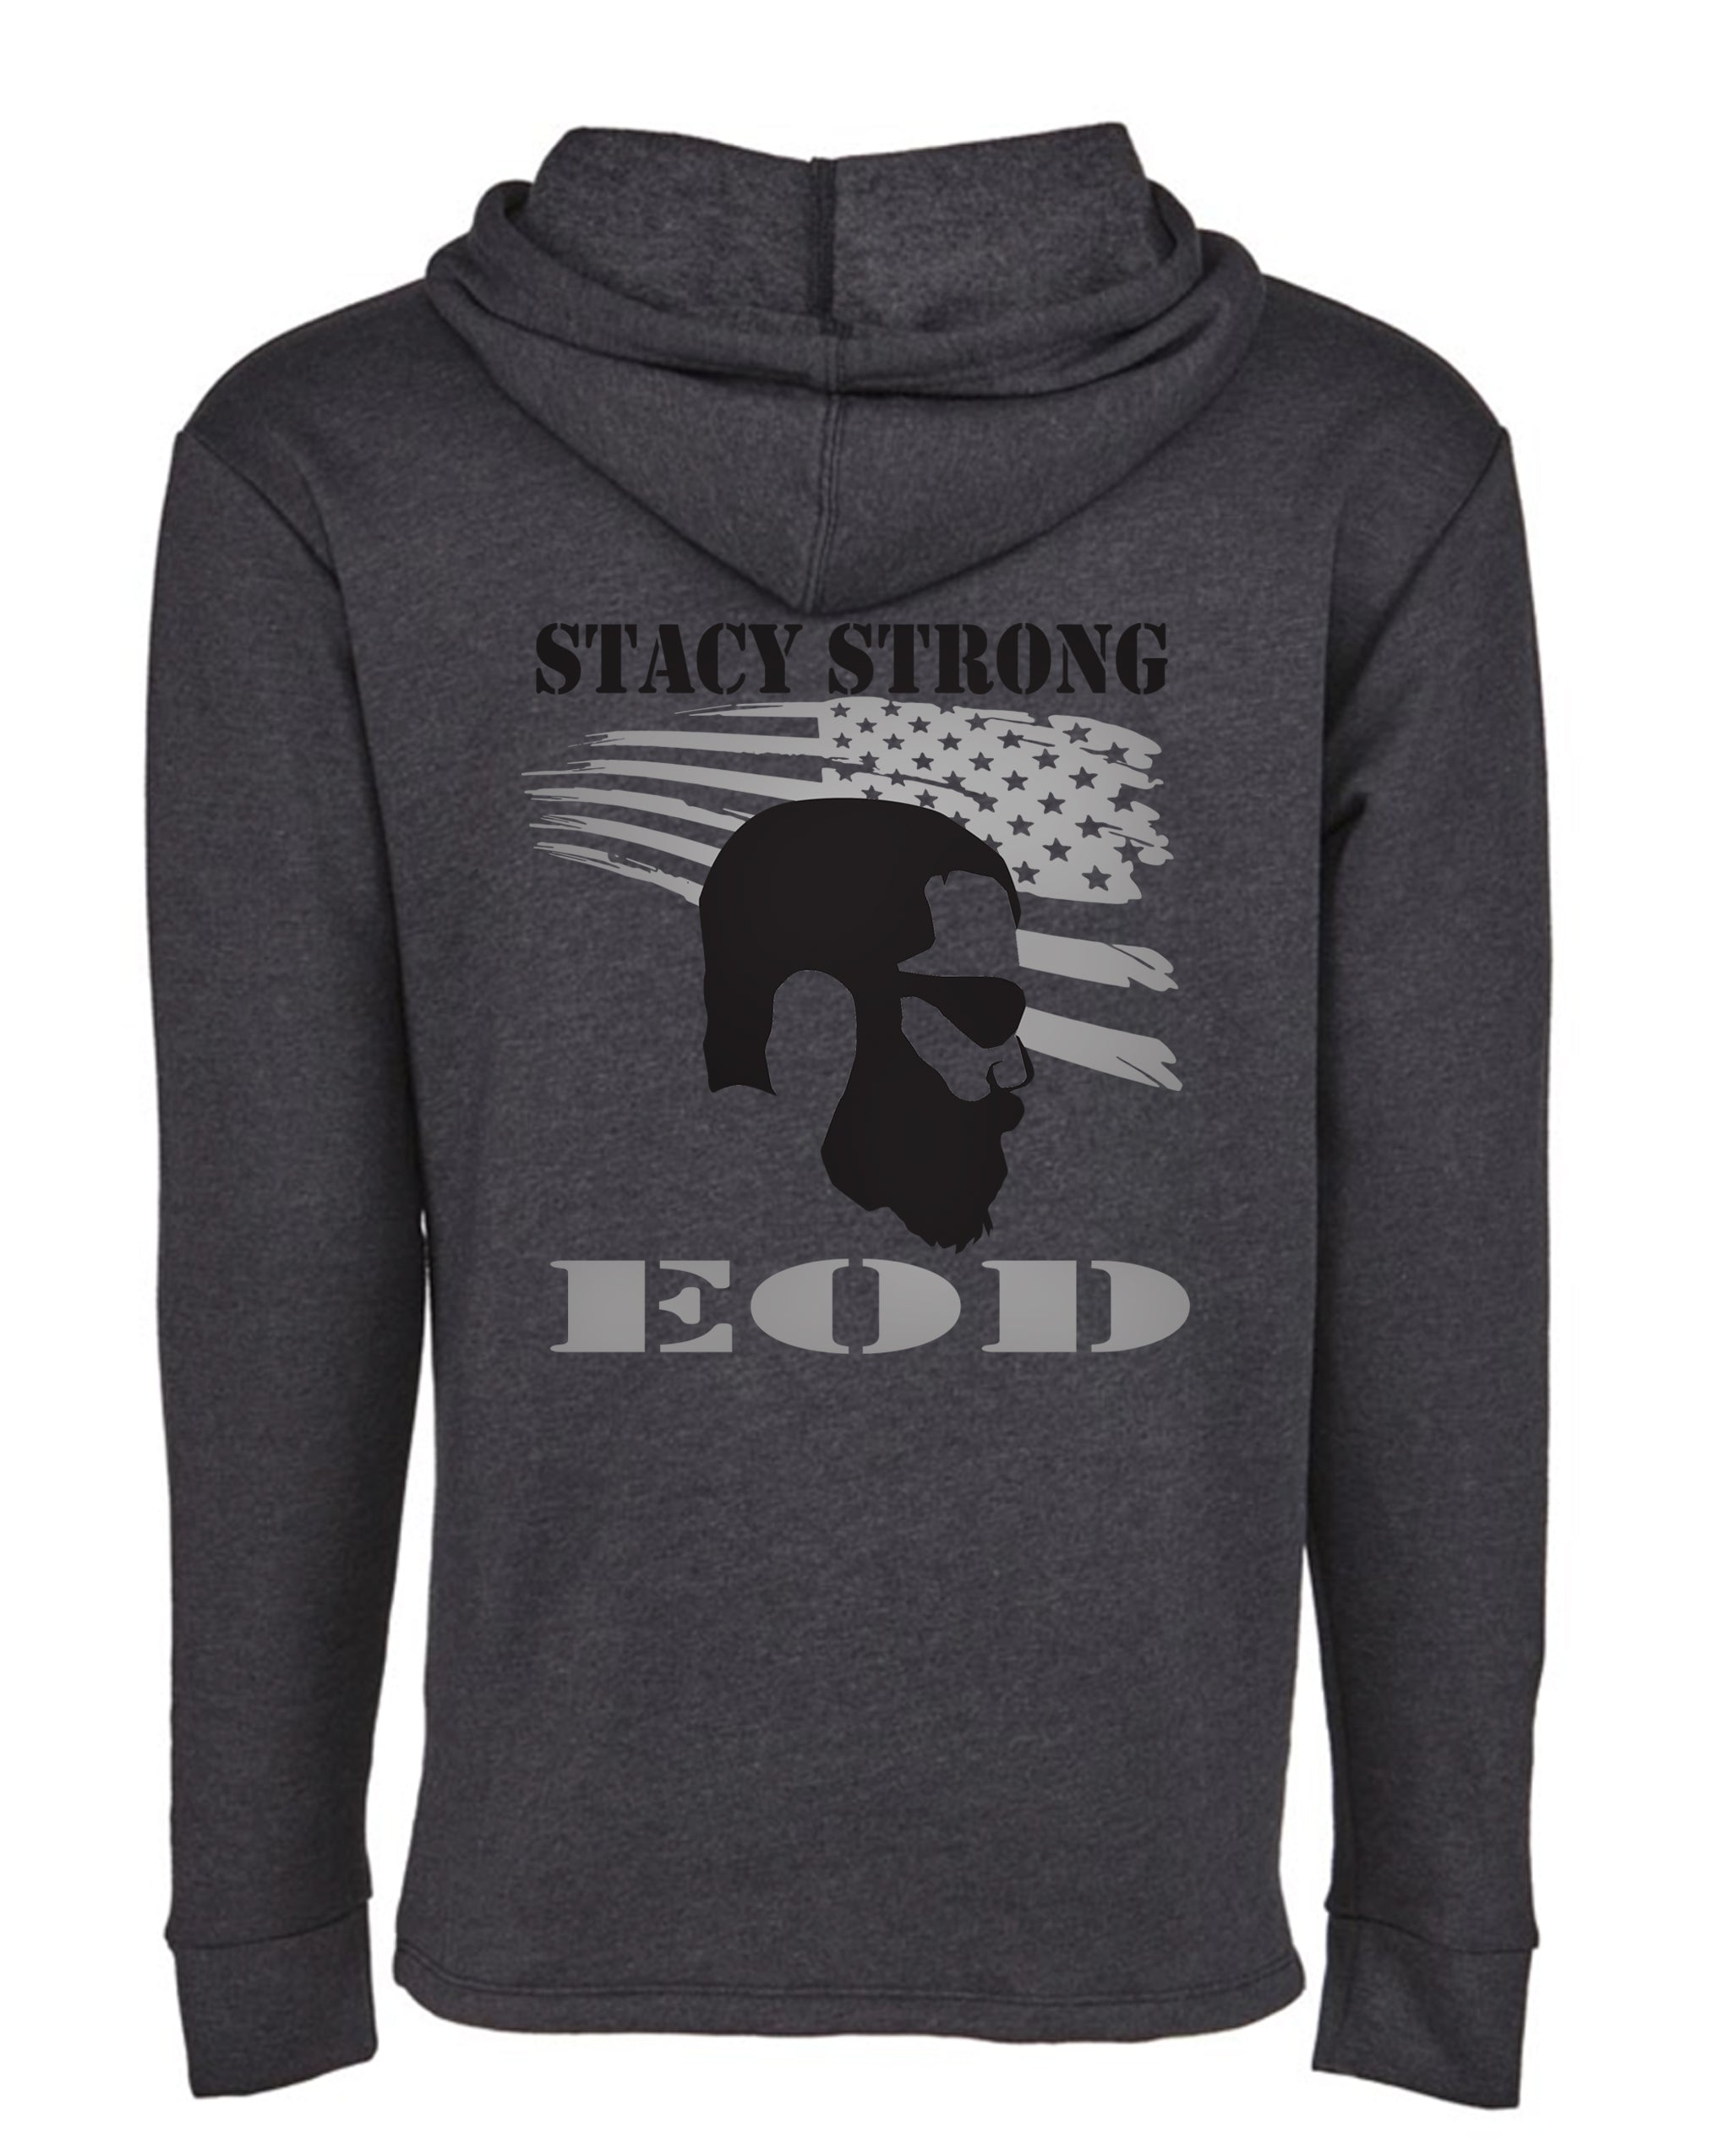 Stacy Strong Lightweight Hoody